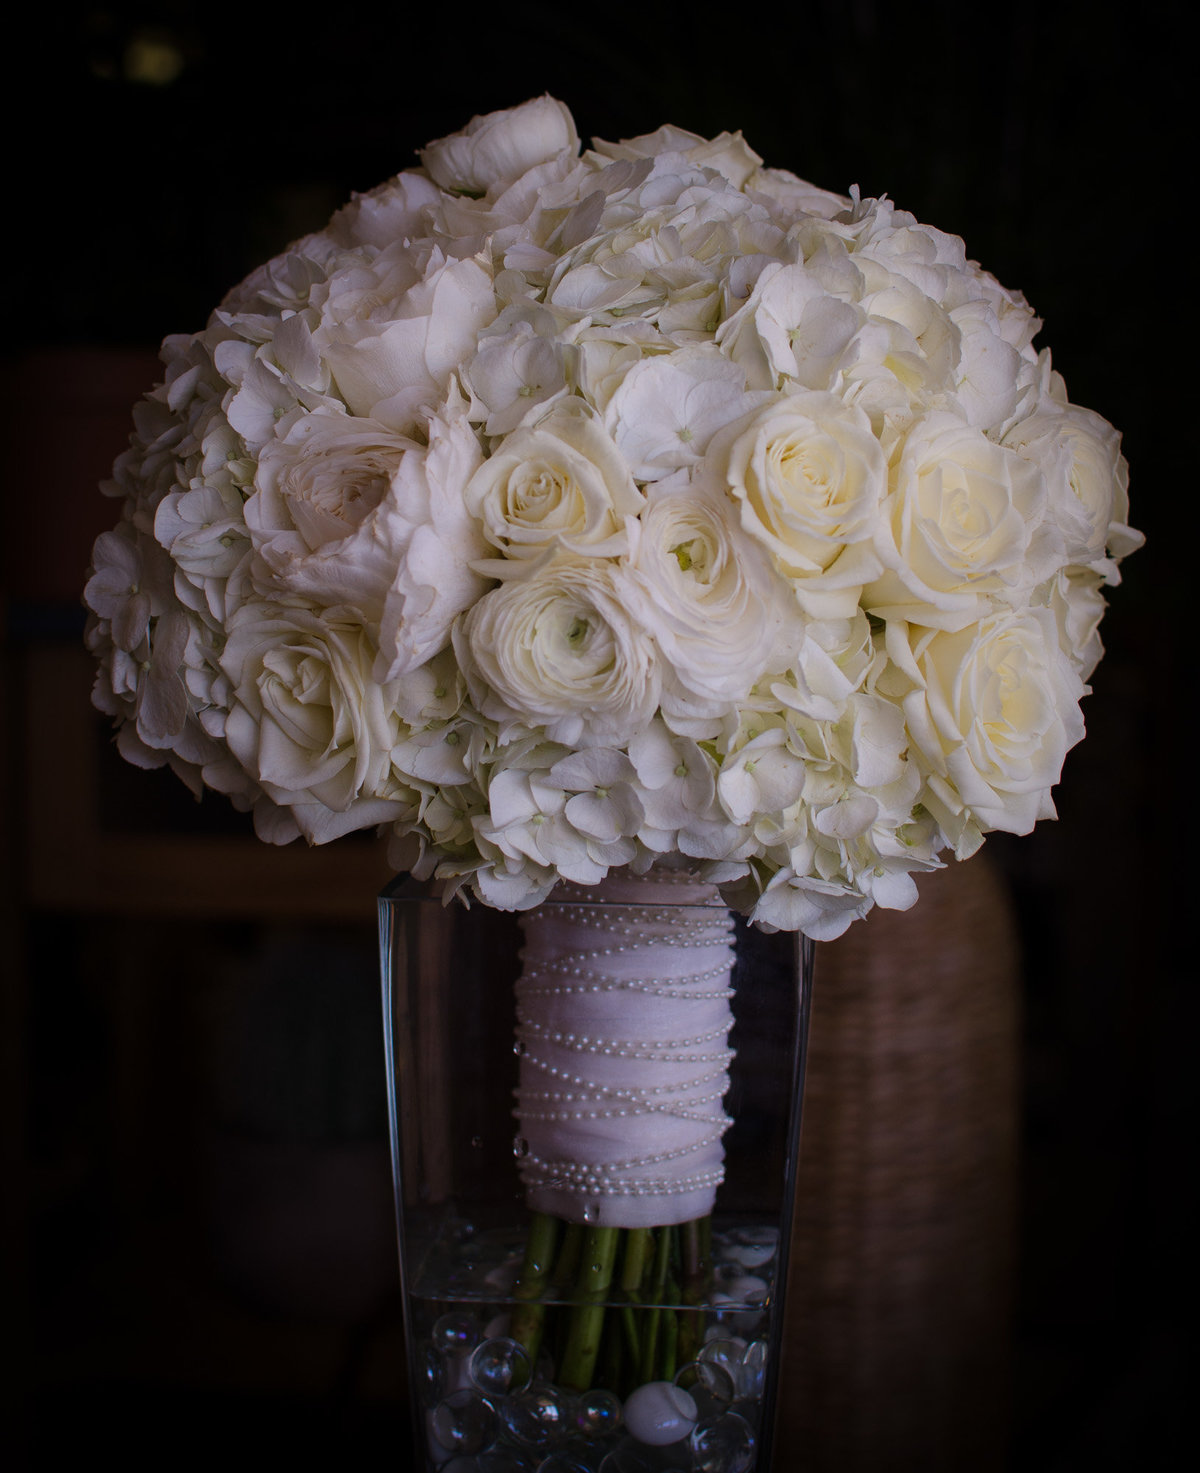 Premier wedding florist specializing in creative  and unique floral designs. Serving Gilbert, Mesa, Chandler, Gold Canyon, Tempe, Phoenix and the surrounding area.